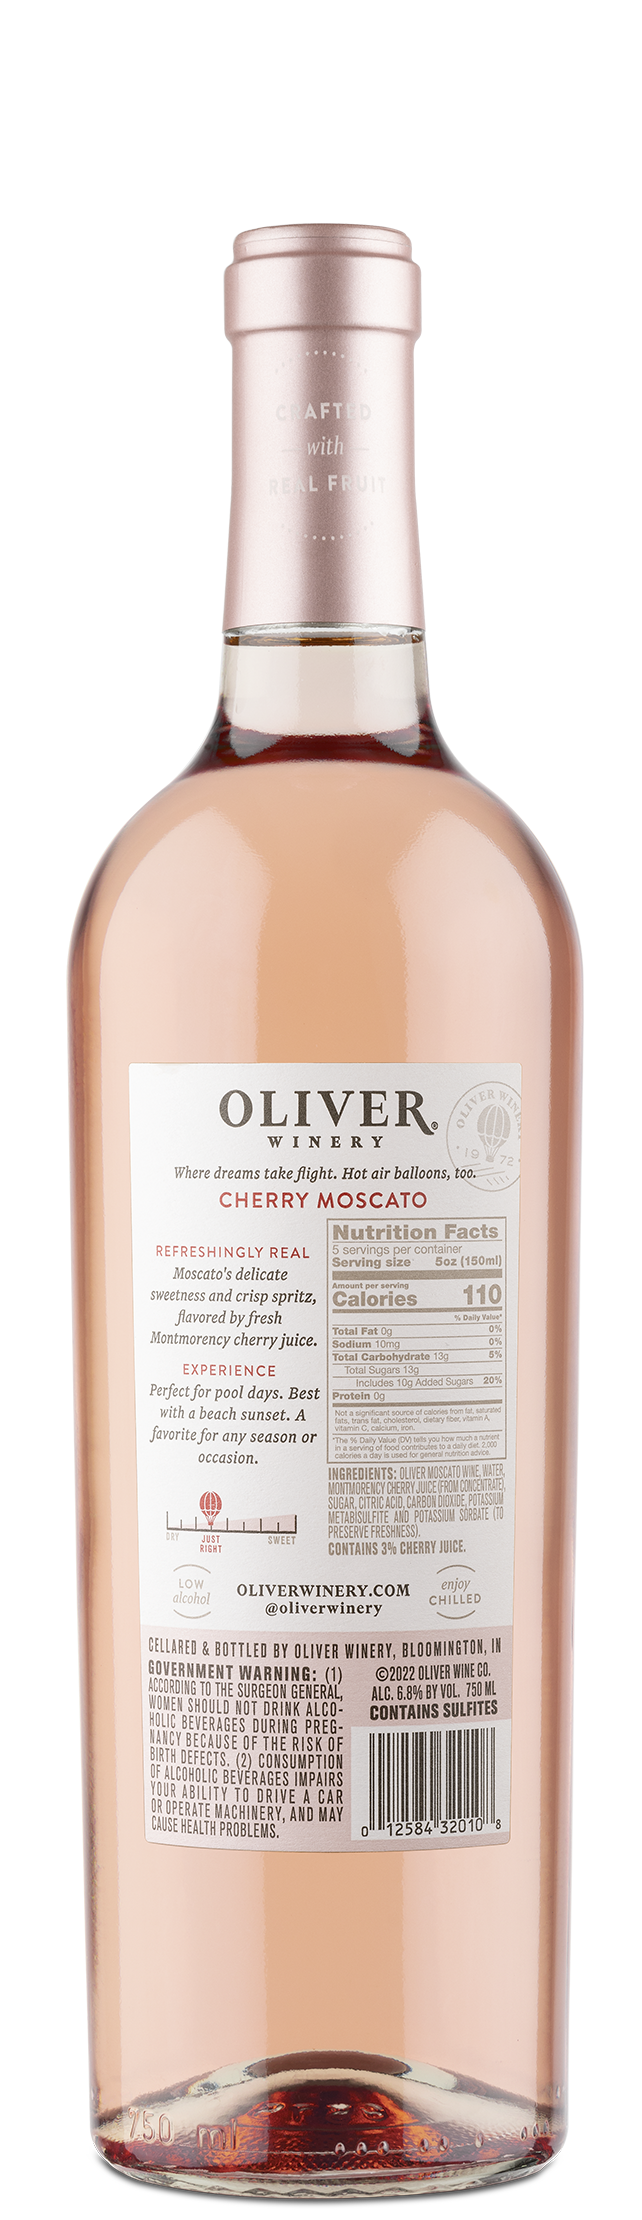 Oliver Winery Vine Series Cherry Moscato Nutrition Information